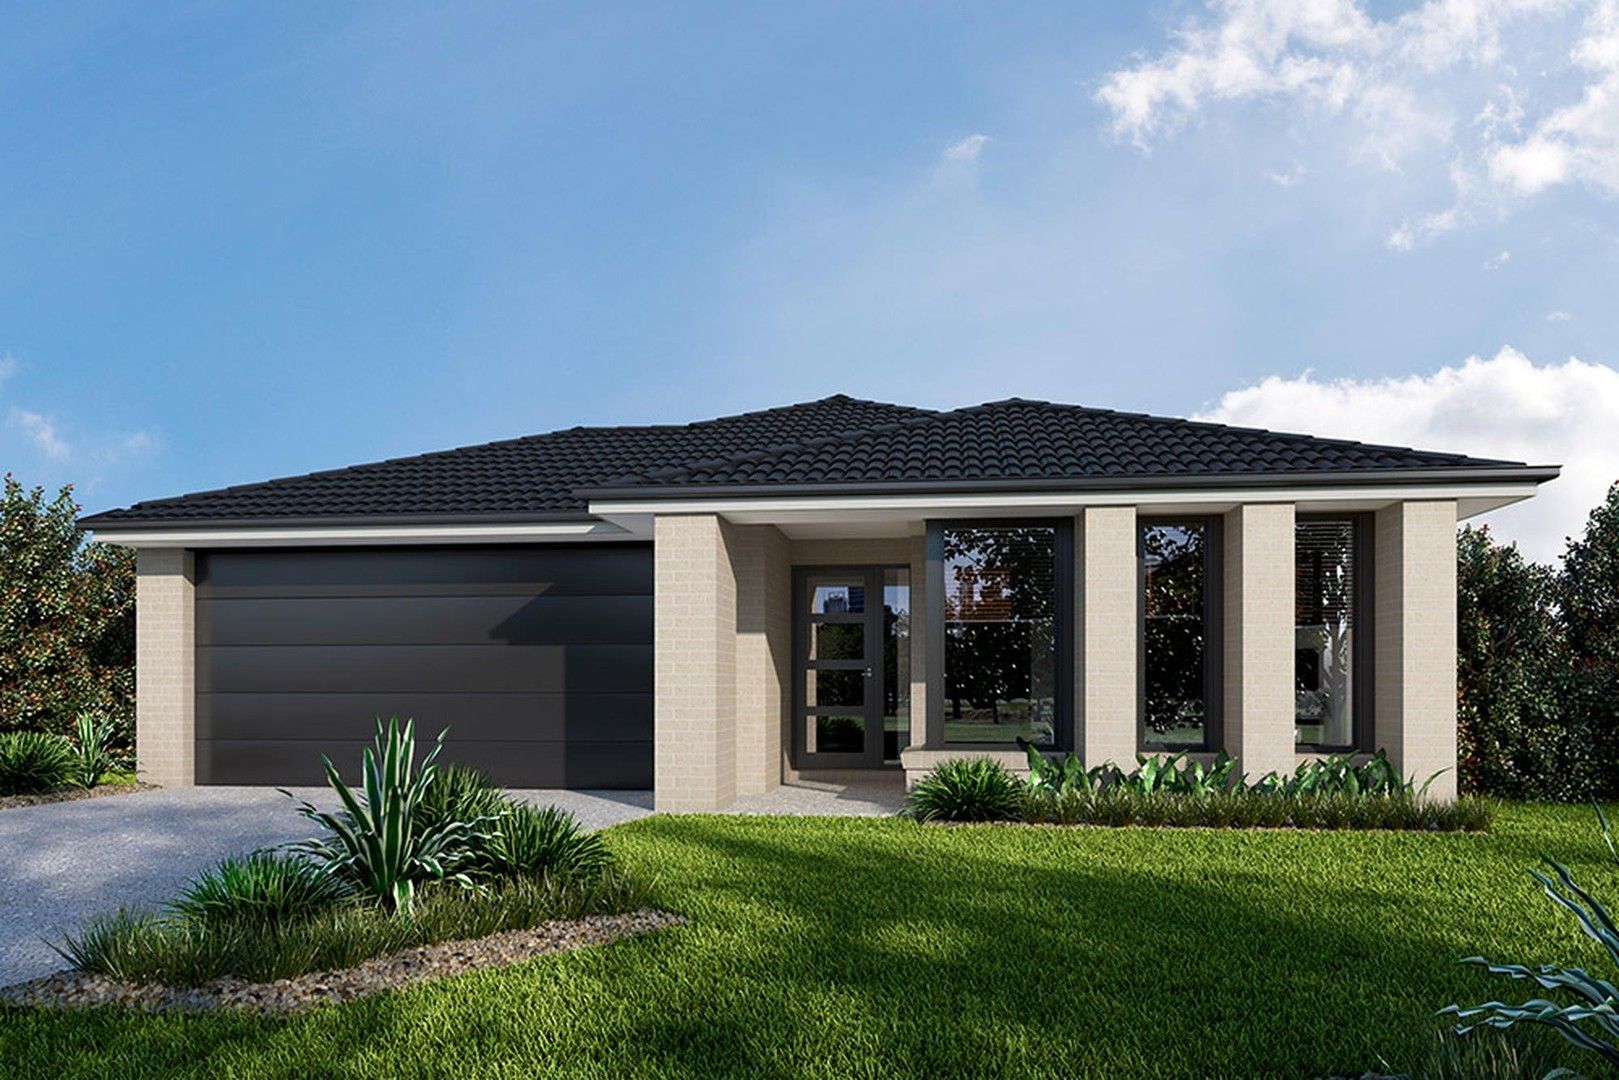 4 bedrooms New House & Land in 1504 Warralily (The Grange) Estate ARMSTRONG CREEK VIC, 3217